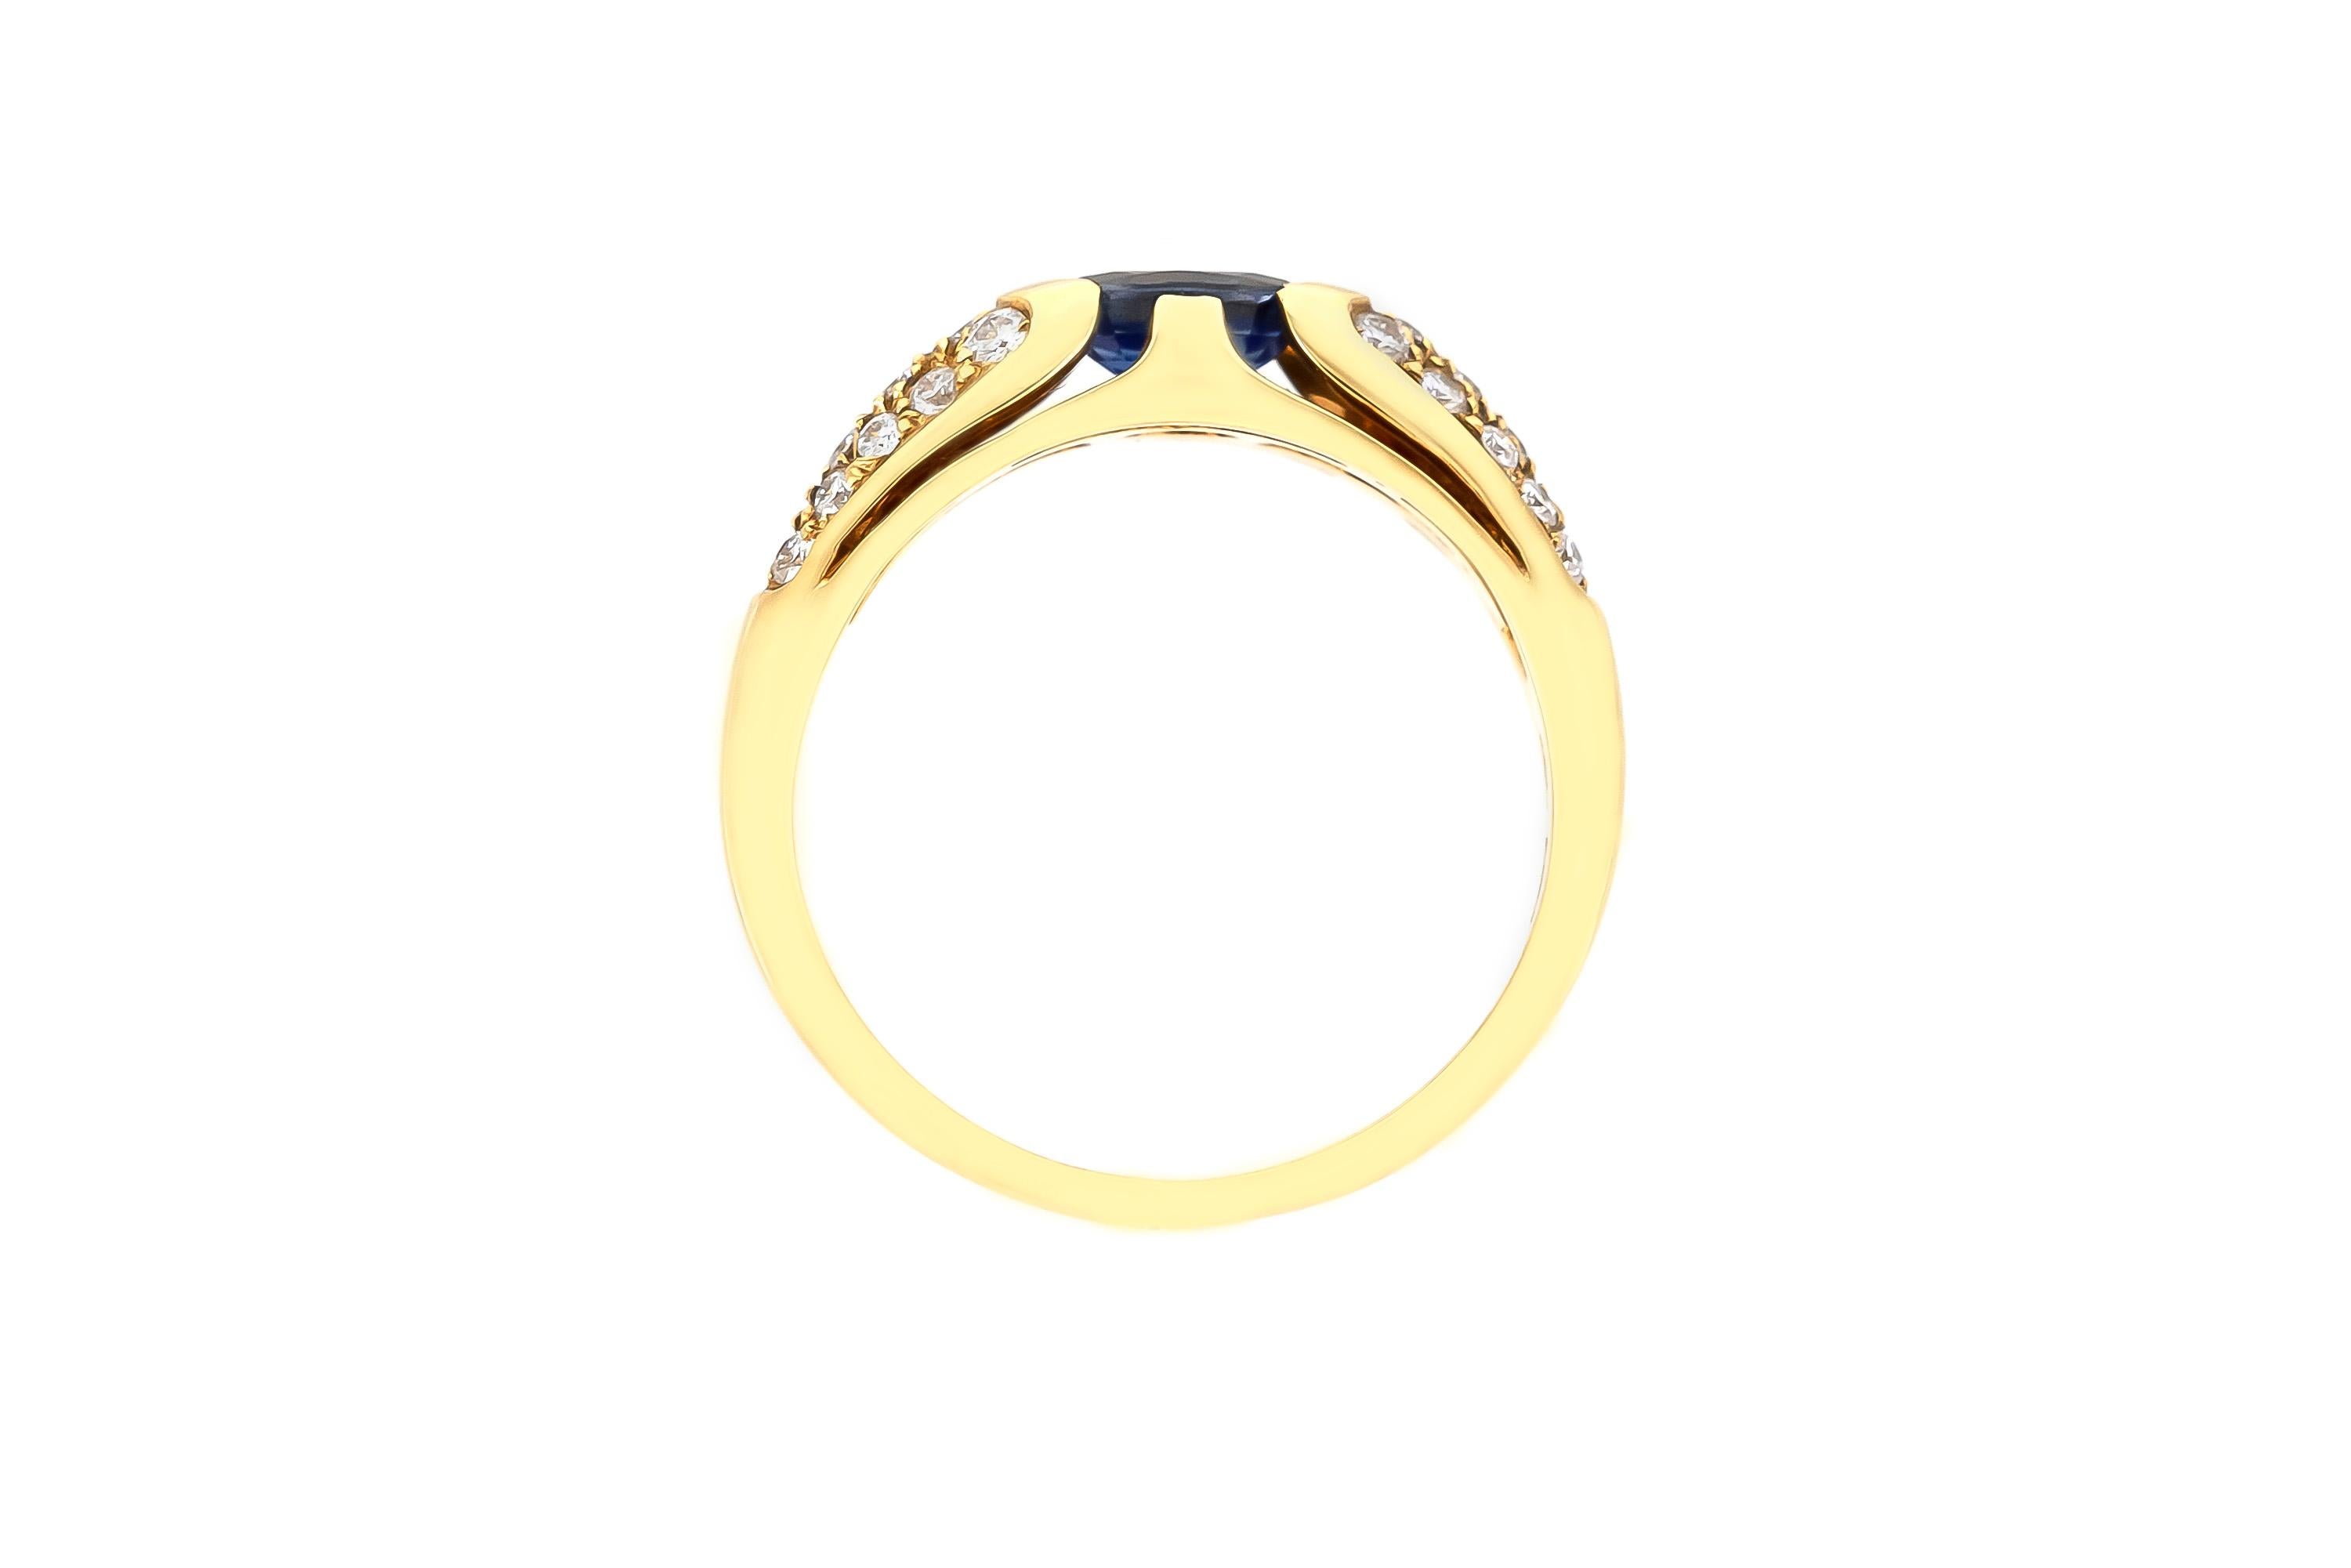 The ring is finely crafted in 18k yellow gold with diamonds weighing approximately total of 0.50 carat and sapphire weighing approximately total of 0.70 carat.
Circa 1980